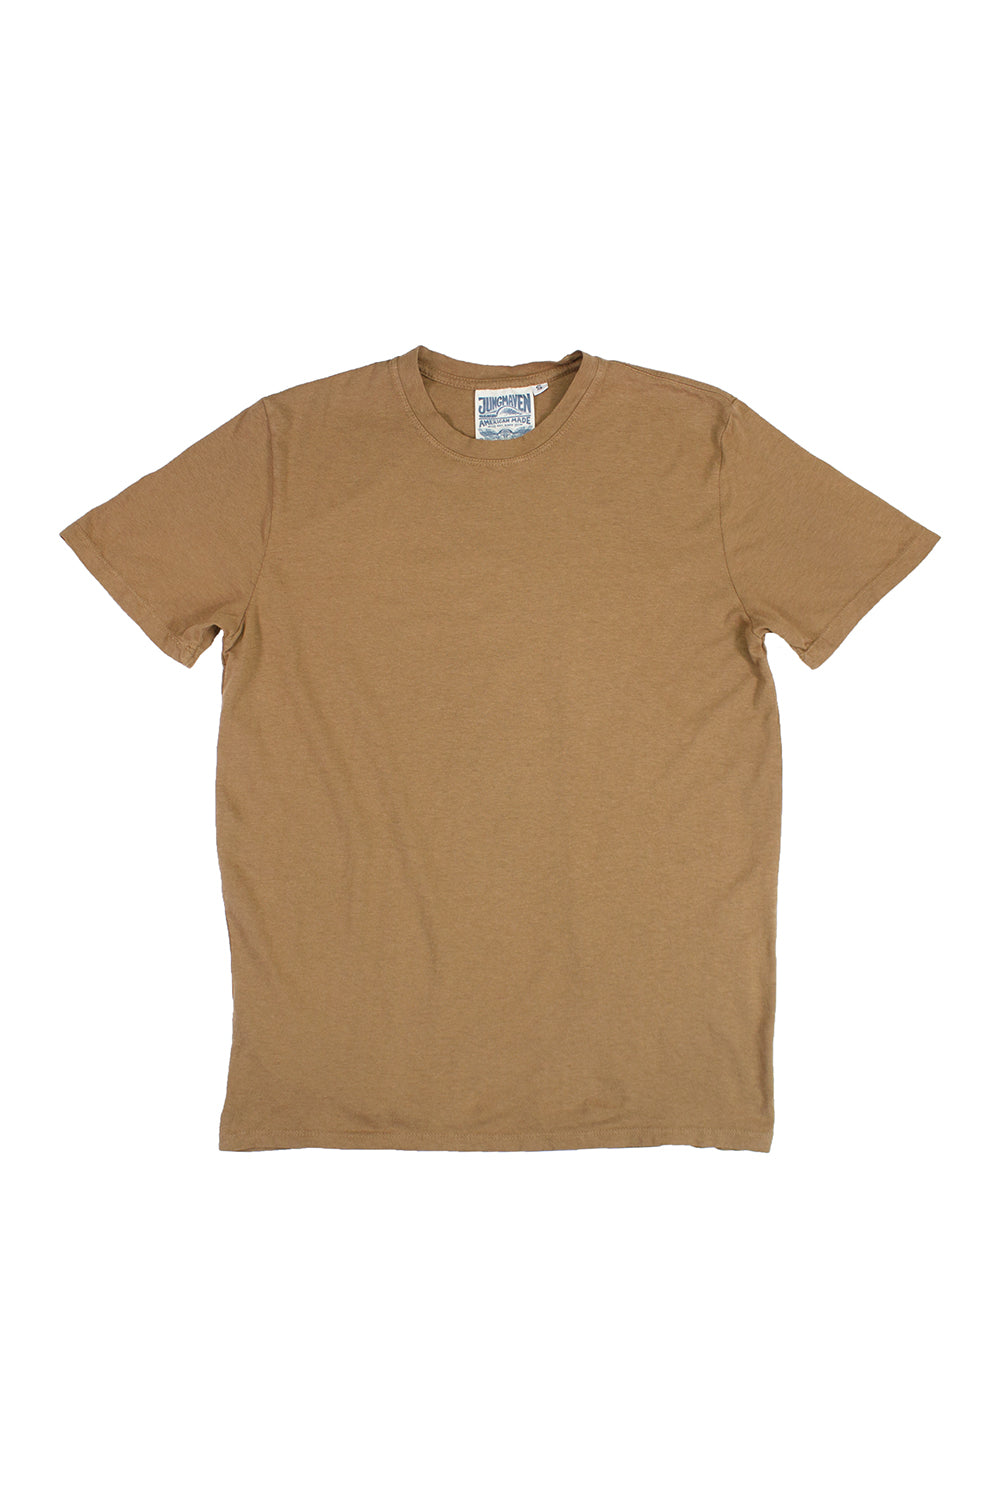 Basic Tee | Jungmaven Hemp Clothing & Accessories / Color: Coyote